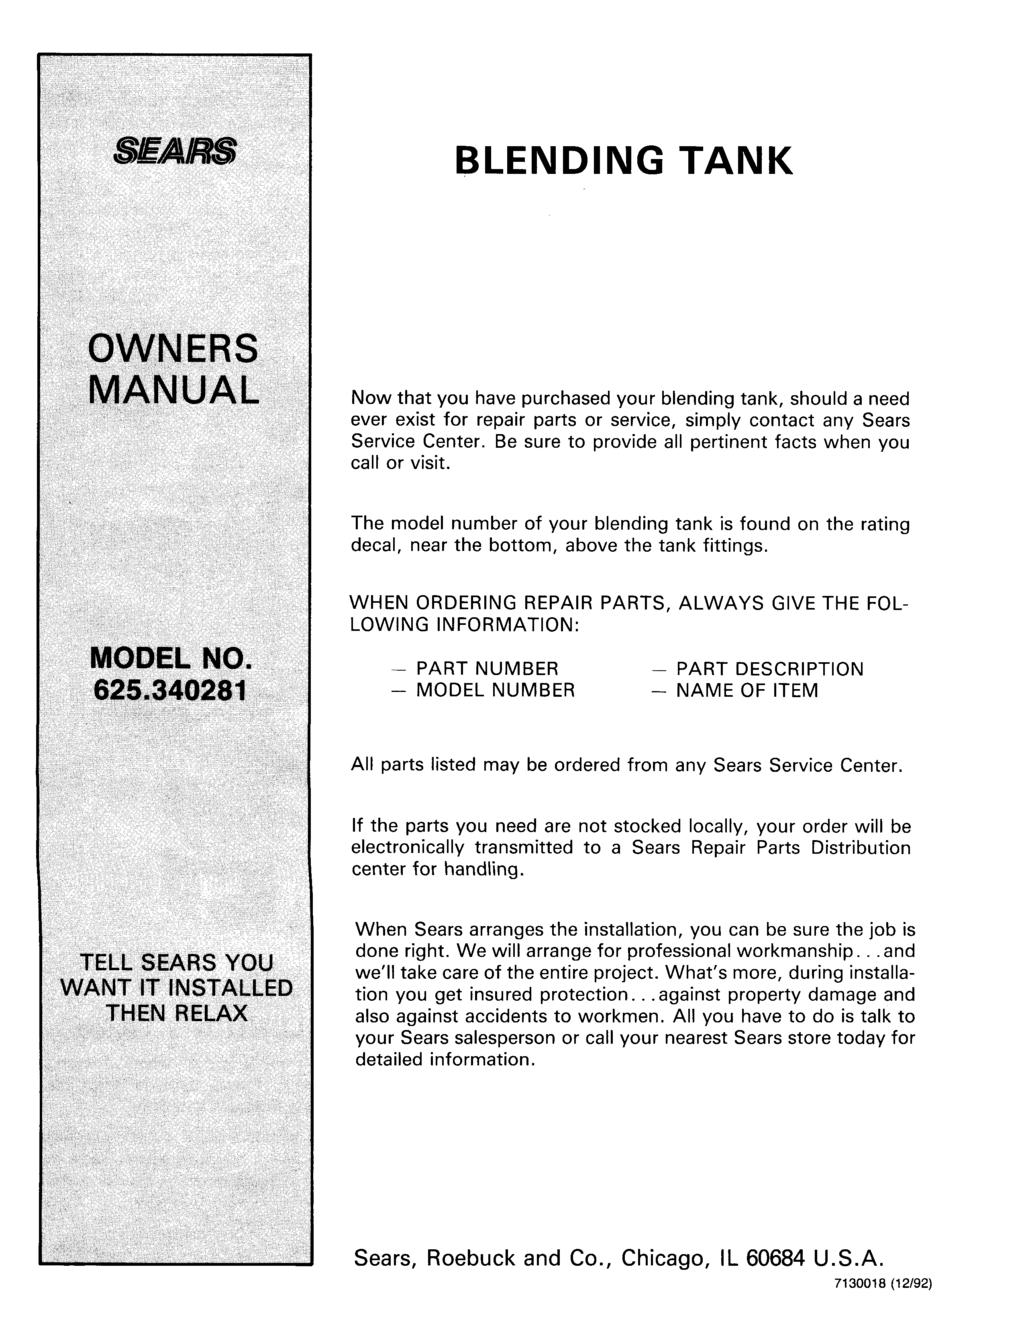 BLENDING TANK Now that you have purchased your blending tank, should a need ever exist for repair parts or service, simply contact any Sears Service Center.